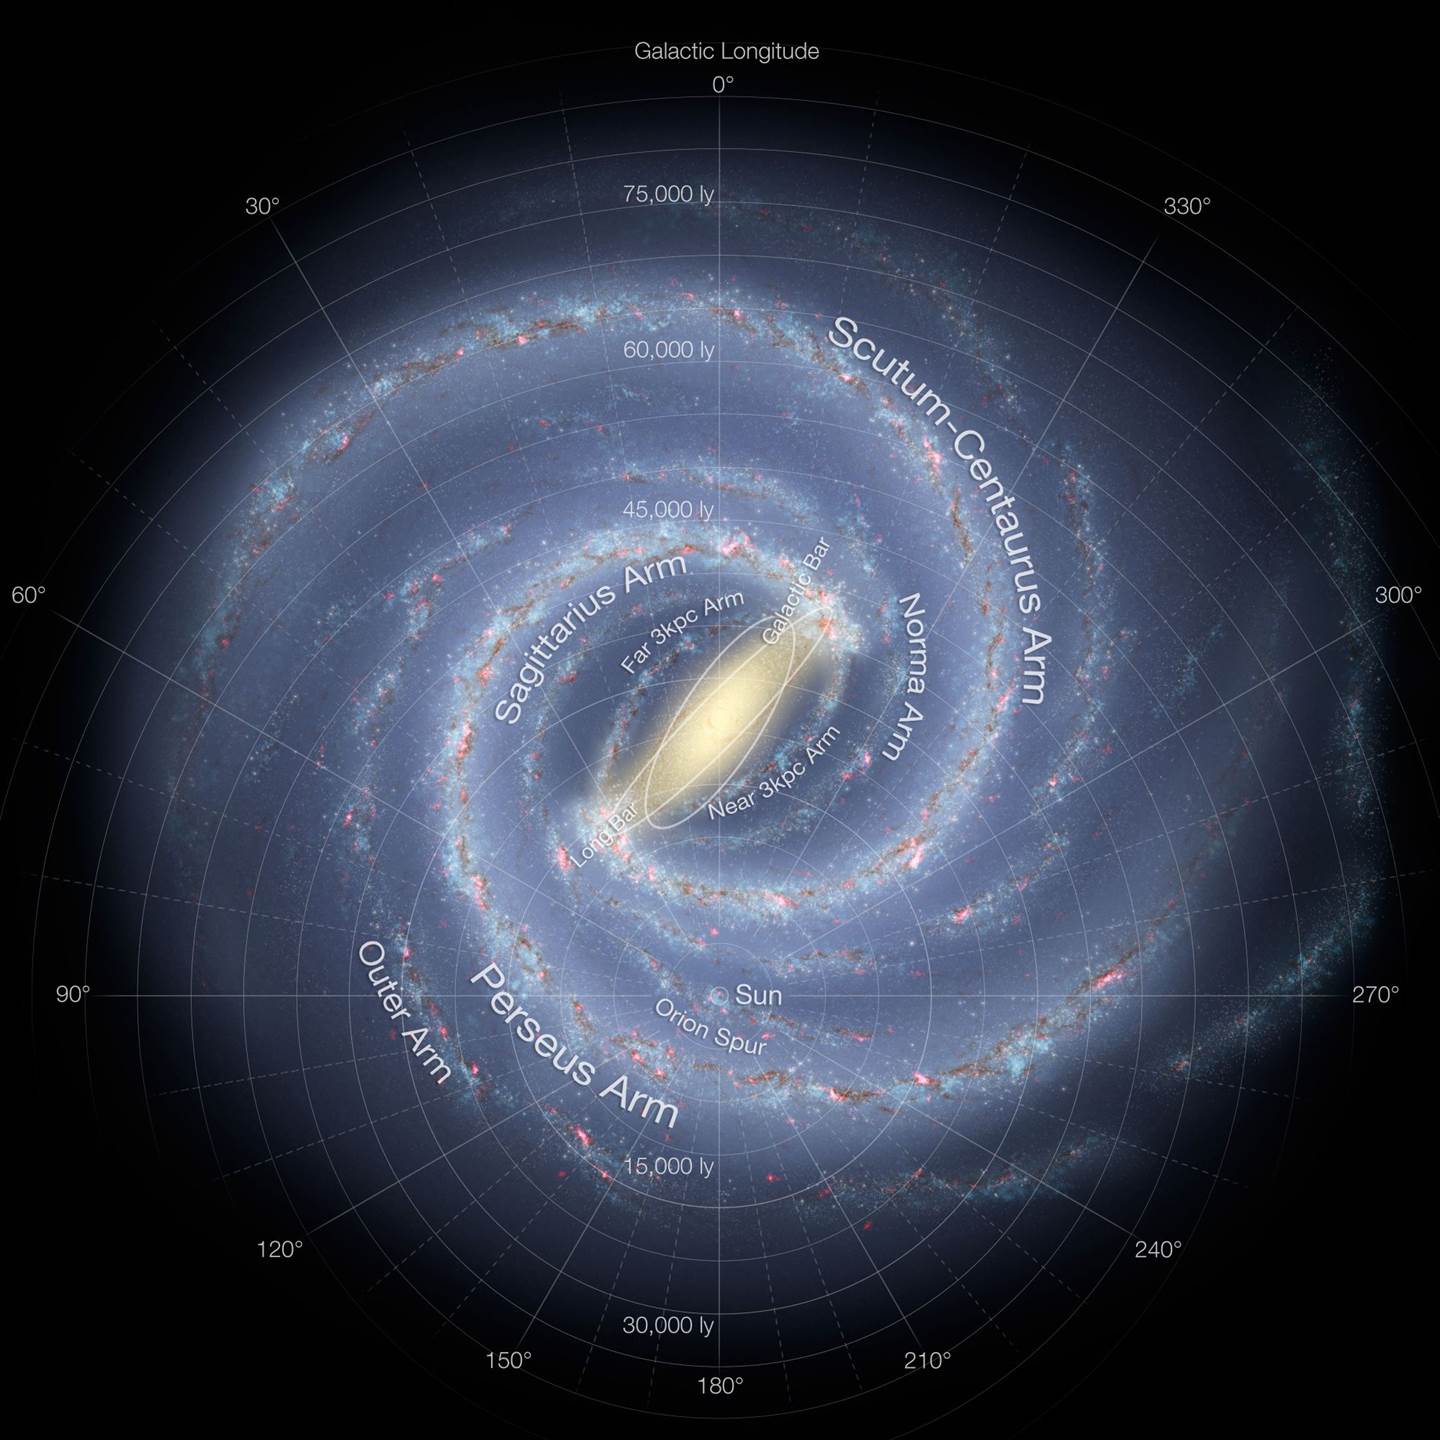 Artist's_impression_of_the_Milky_Way_(updated_-_annotated)small.jpg